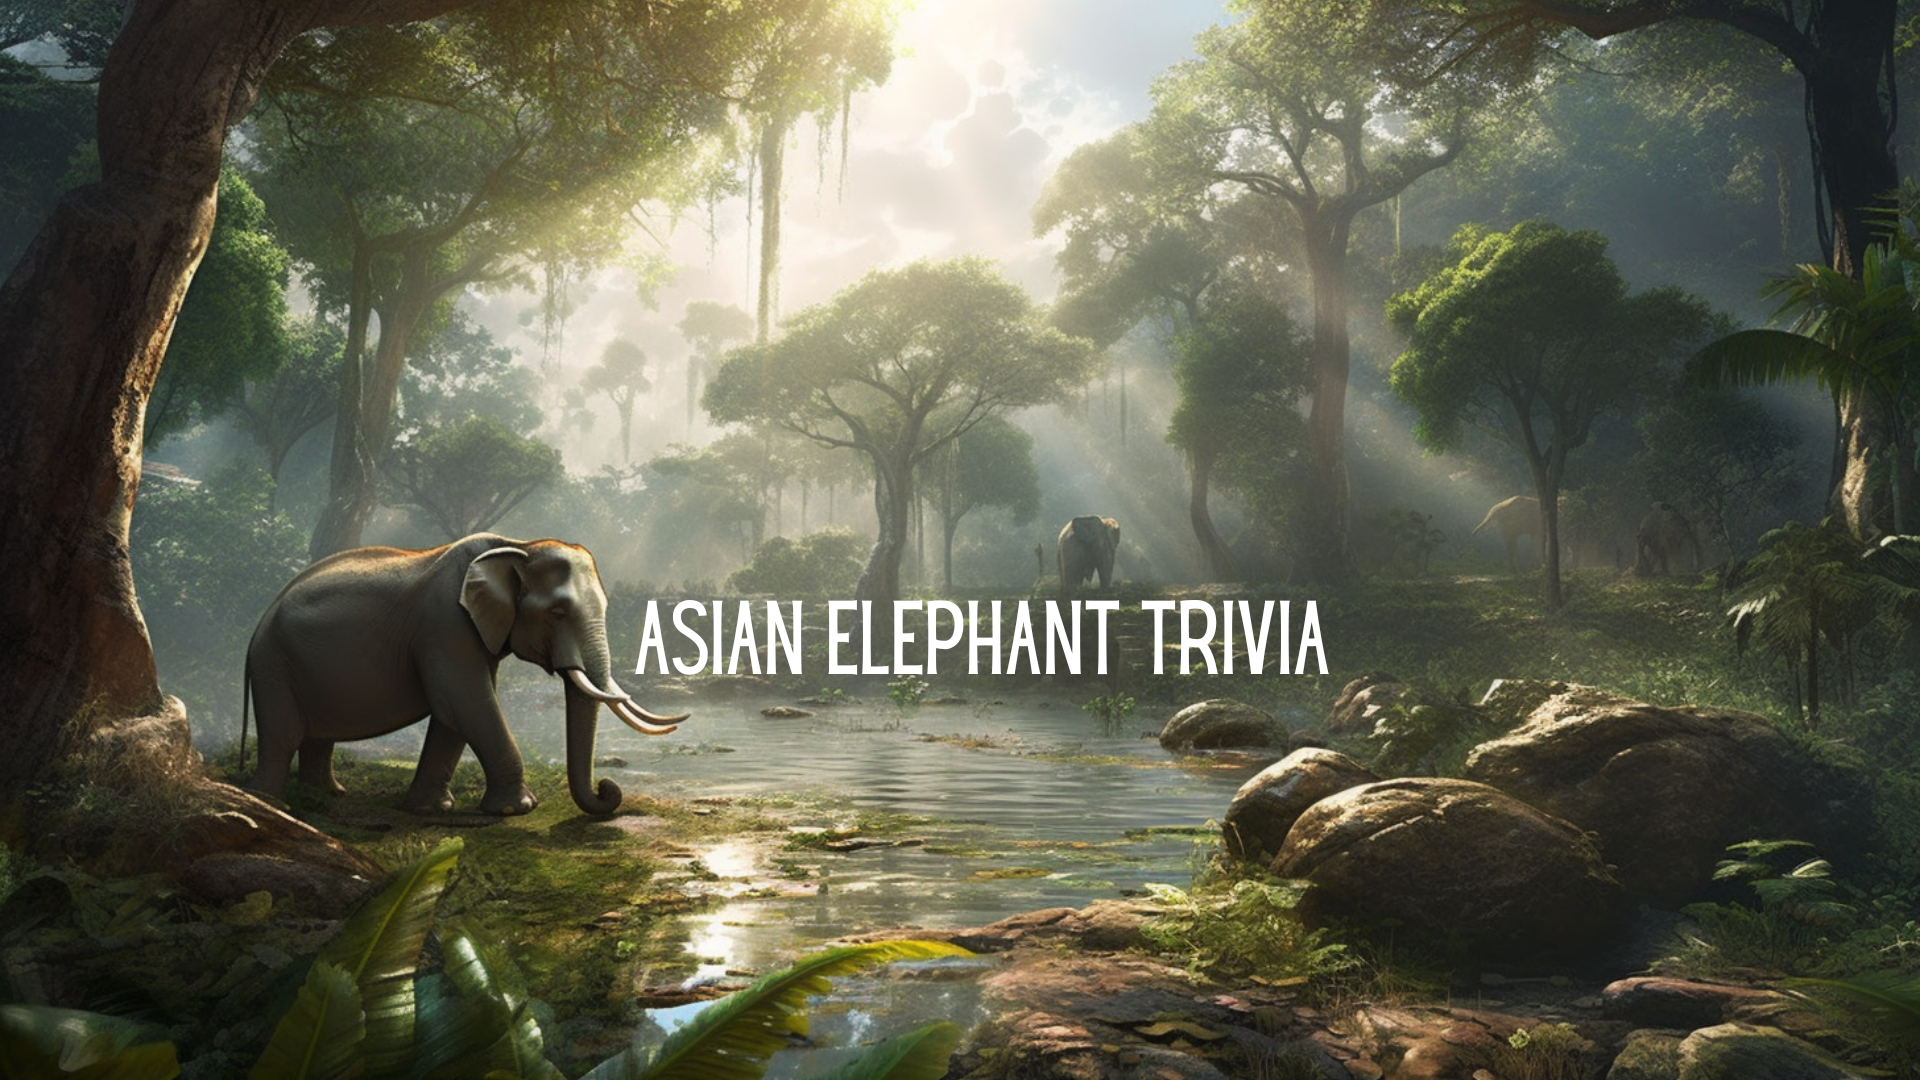 Elephant Trivia Questions & Answers